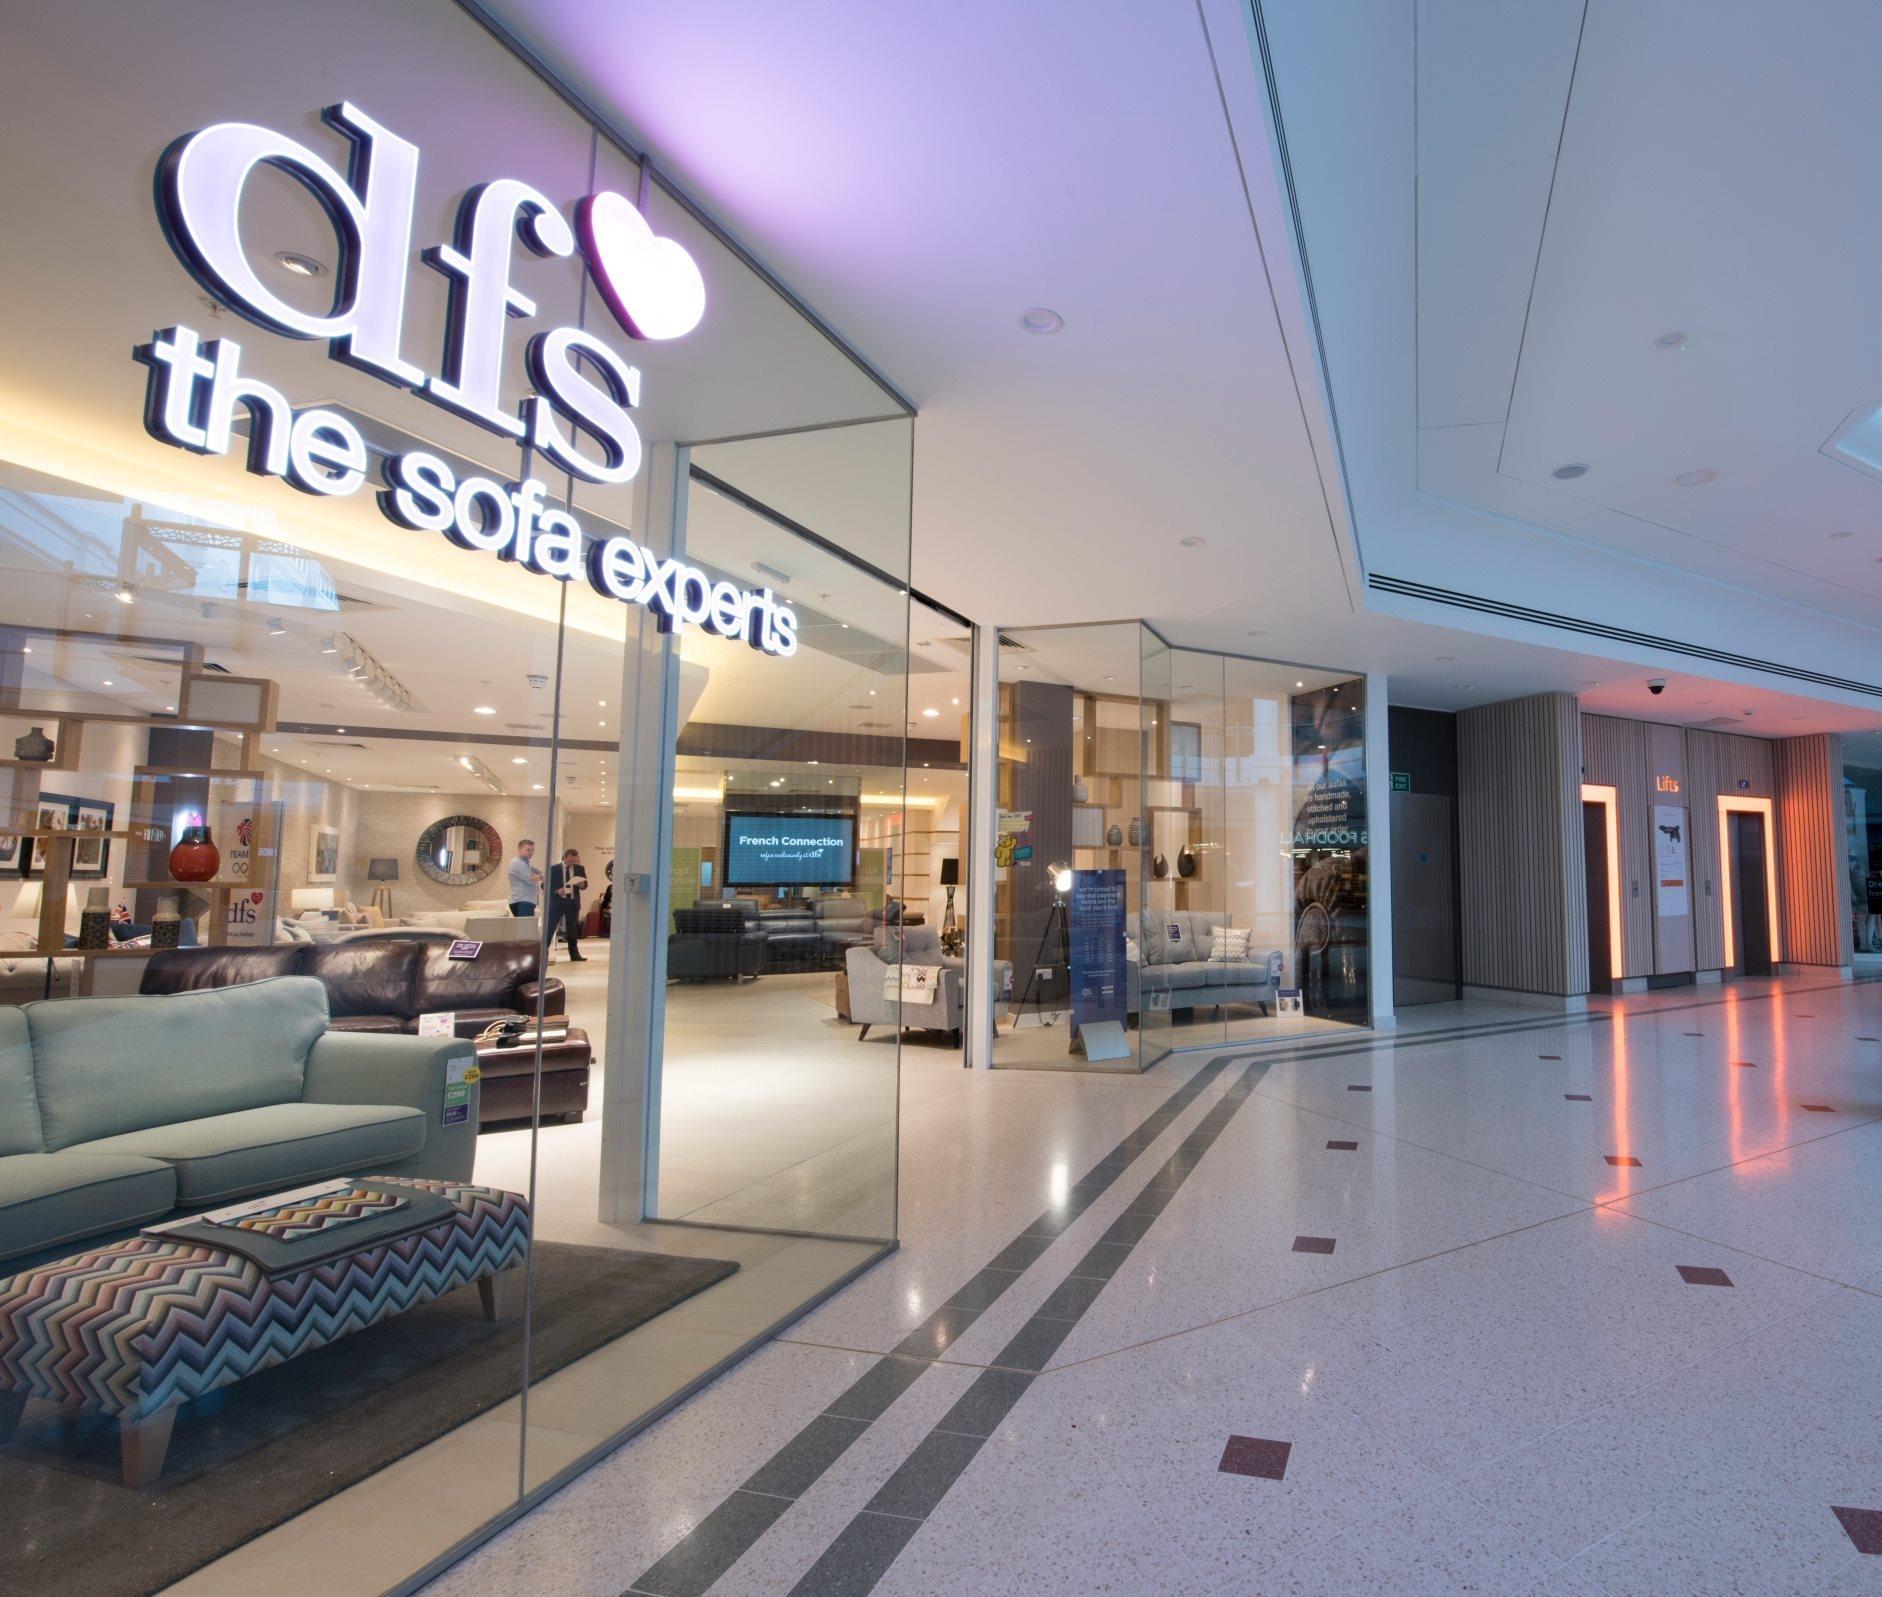 DFS raises £64m in new equity, braces for lockdown to last until